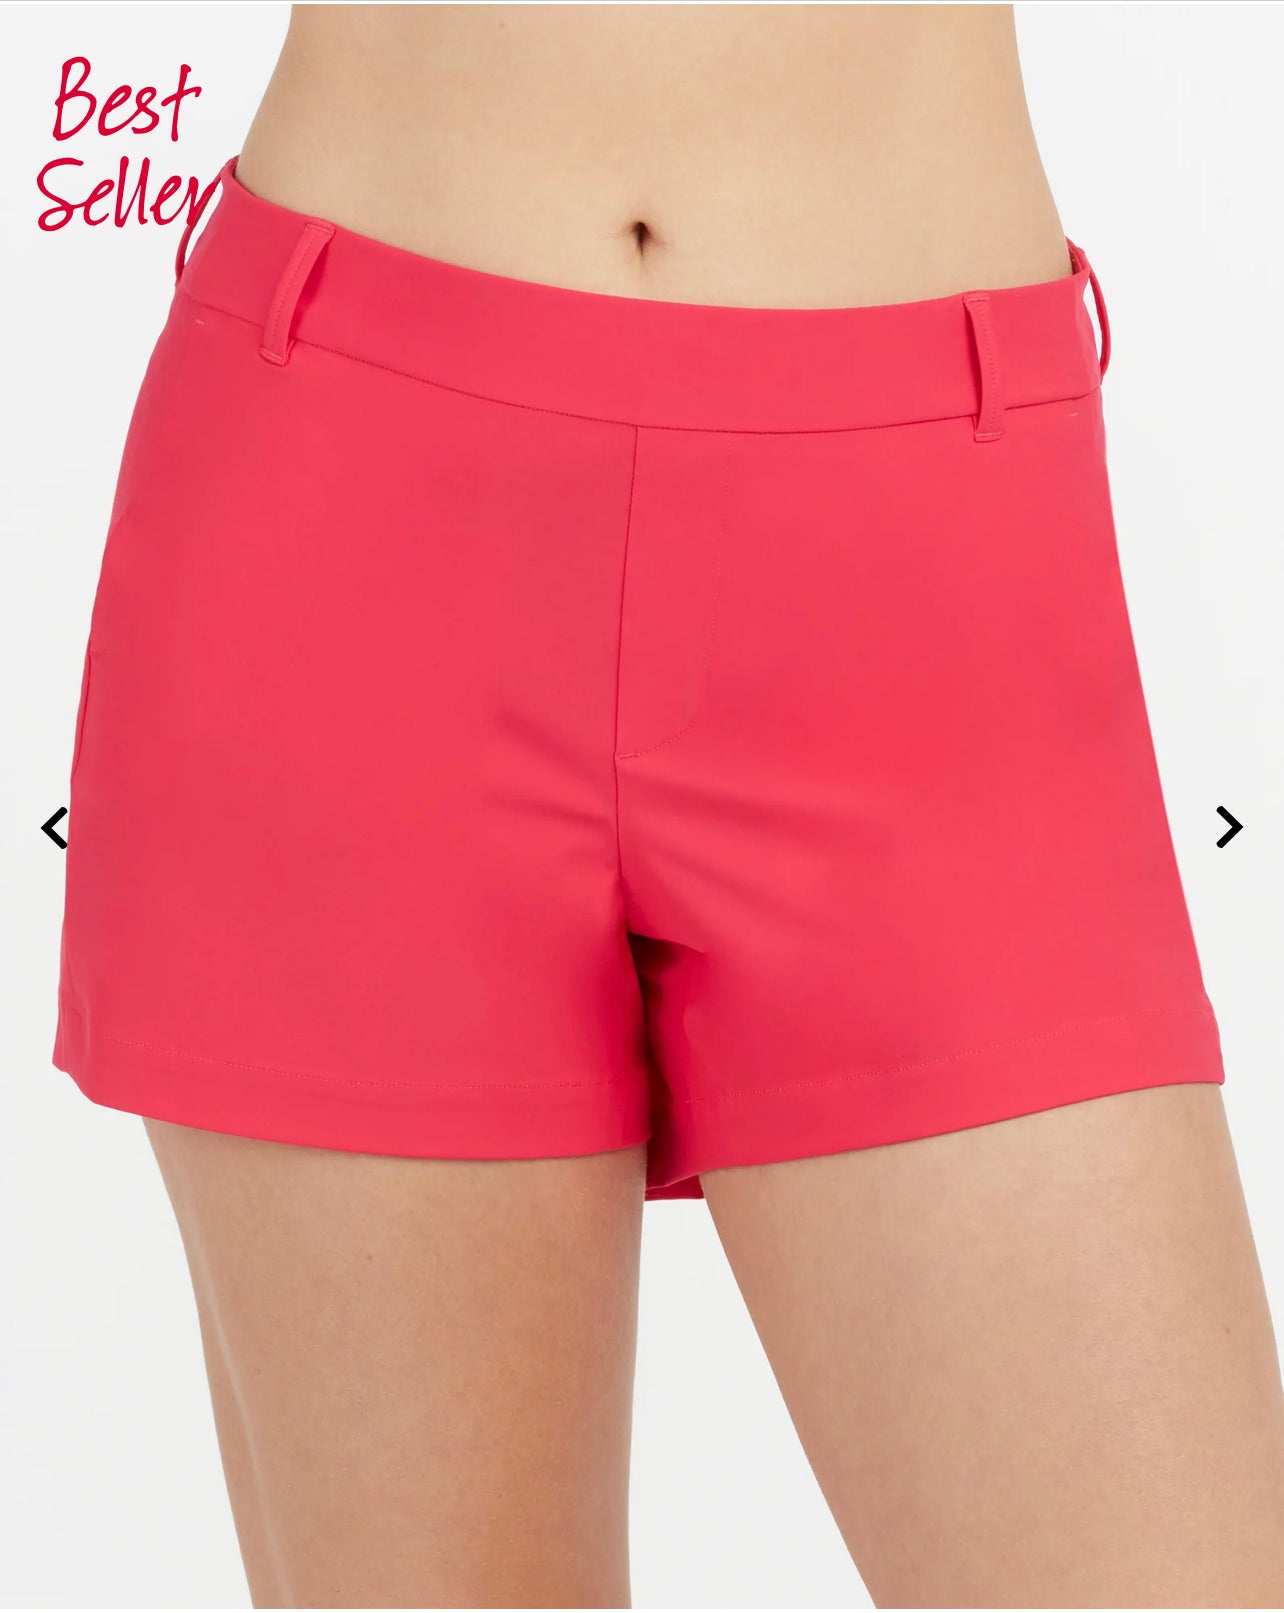 nwt SPANX Stretch Twill Slimming Shorts 5 Chino Cotton Candy Ice Pink XL